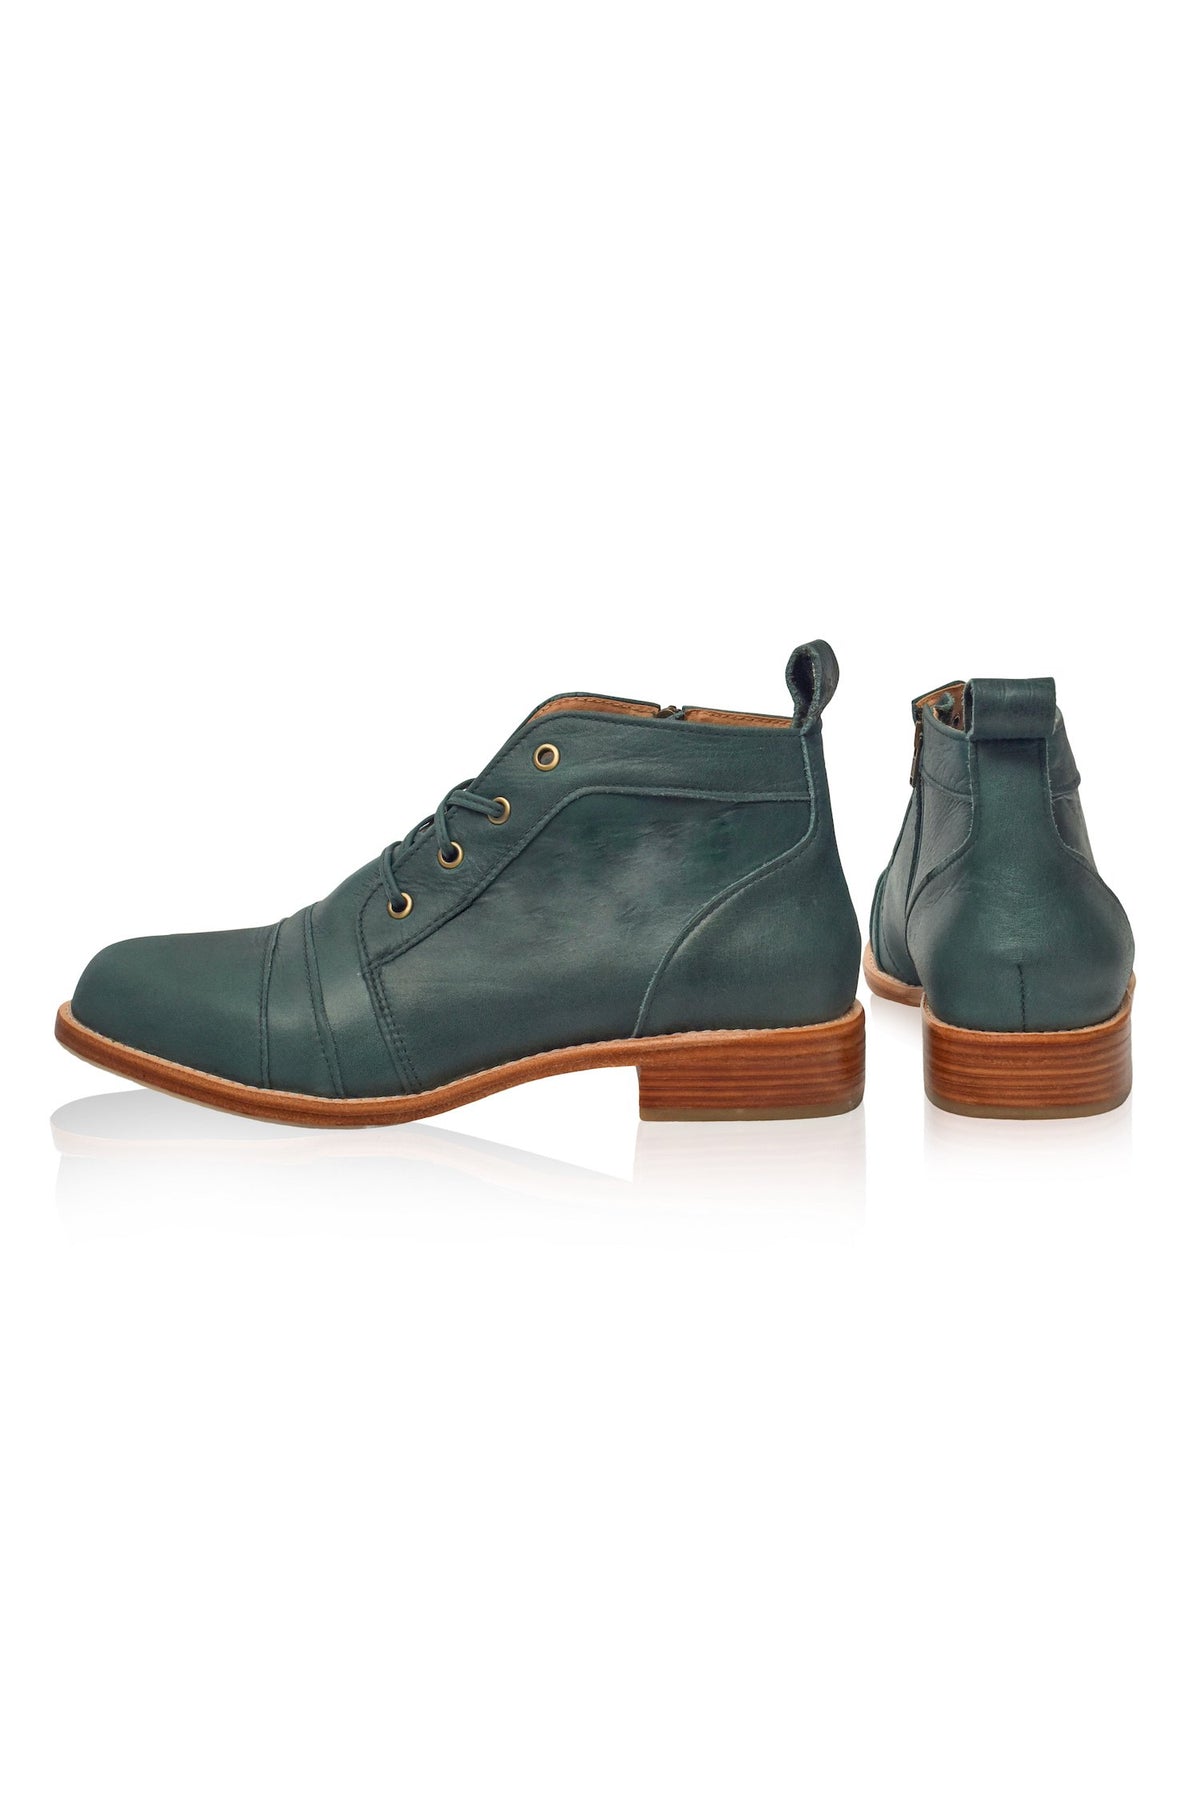 Passage Lace Up Boots by ELF - East Hills Casuals